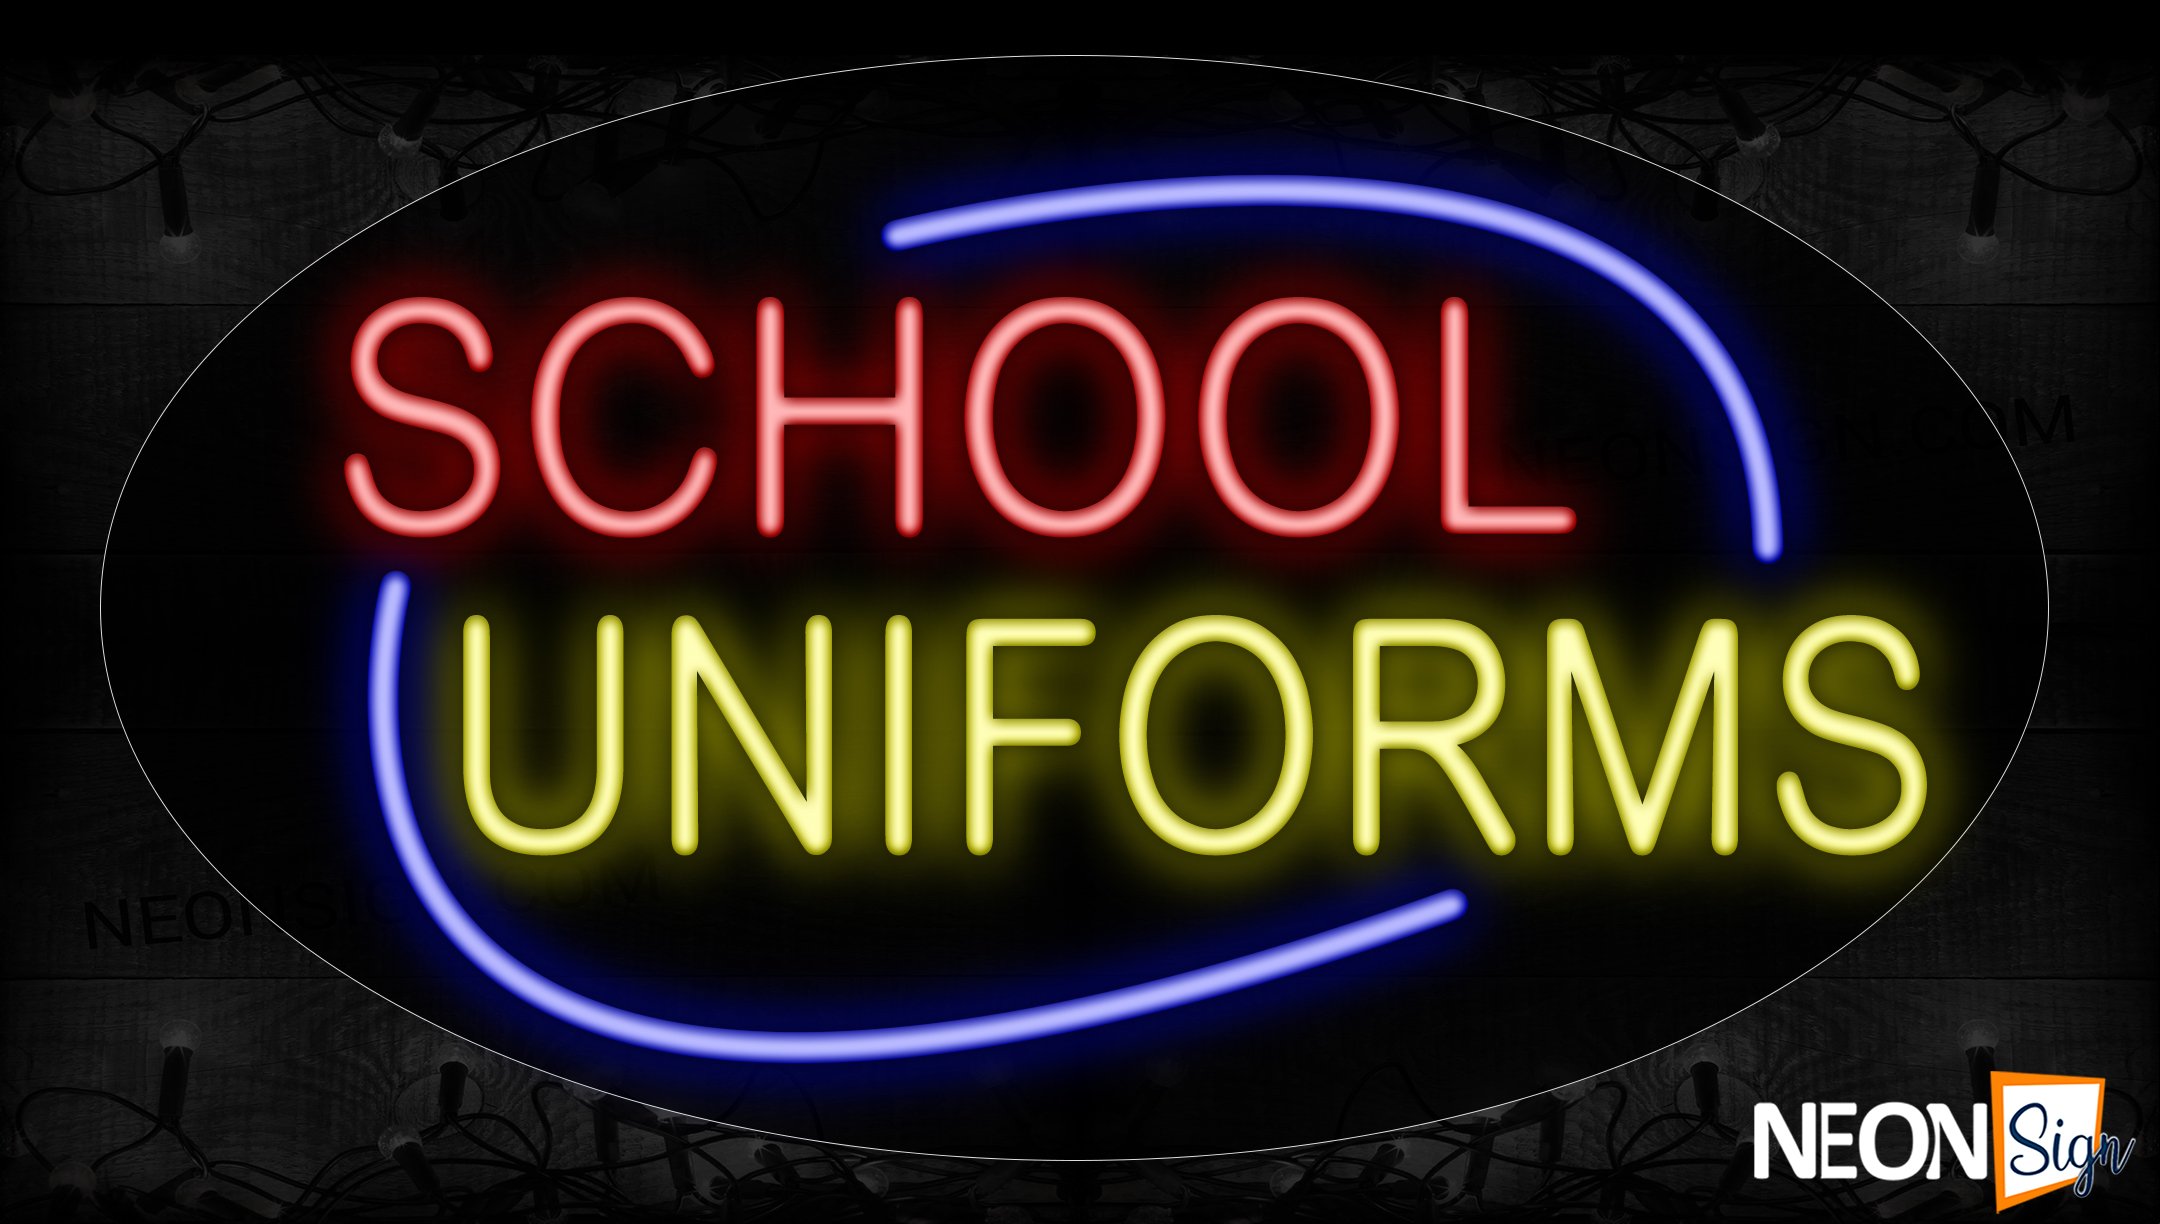 Image of 14488 School Uniforms With Arc Border Neon Signs_17x30 Contoured Black Backing